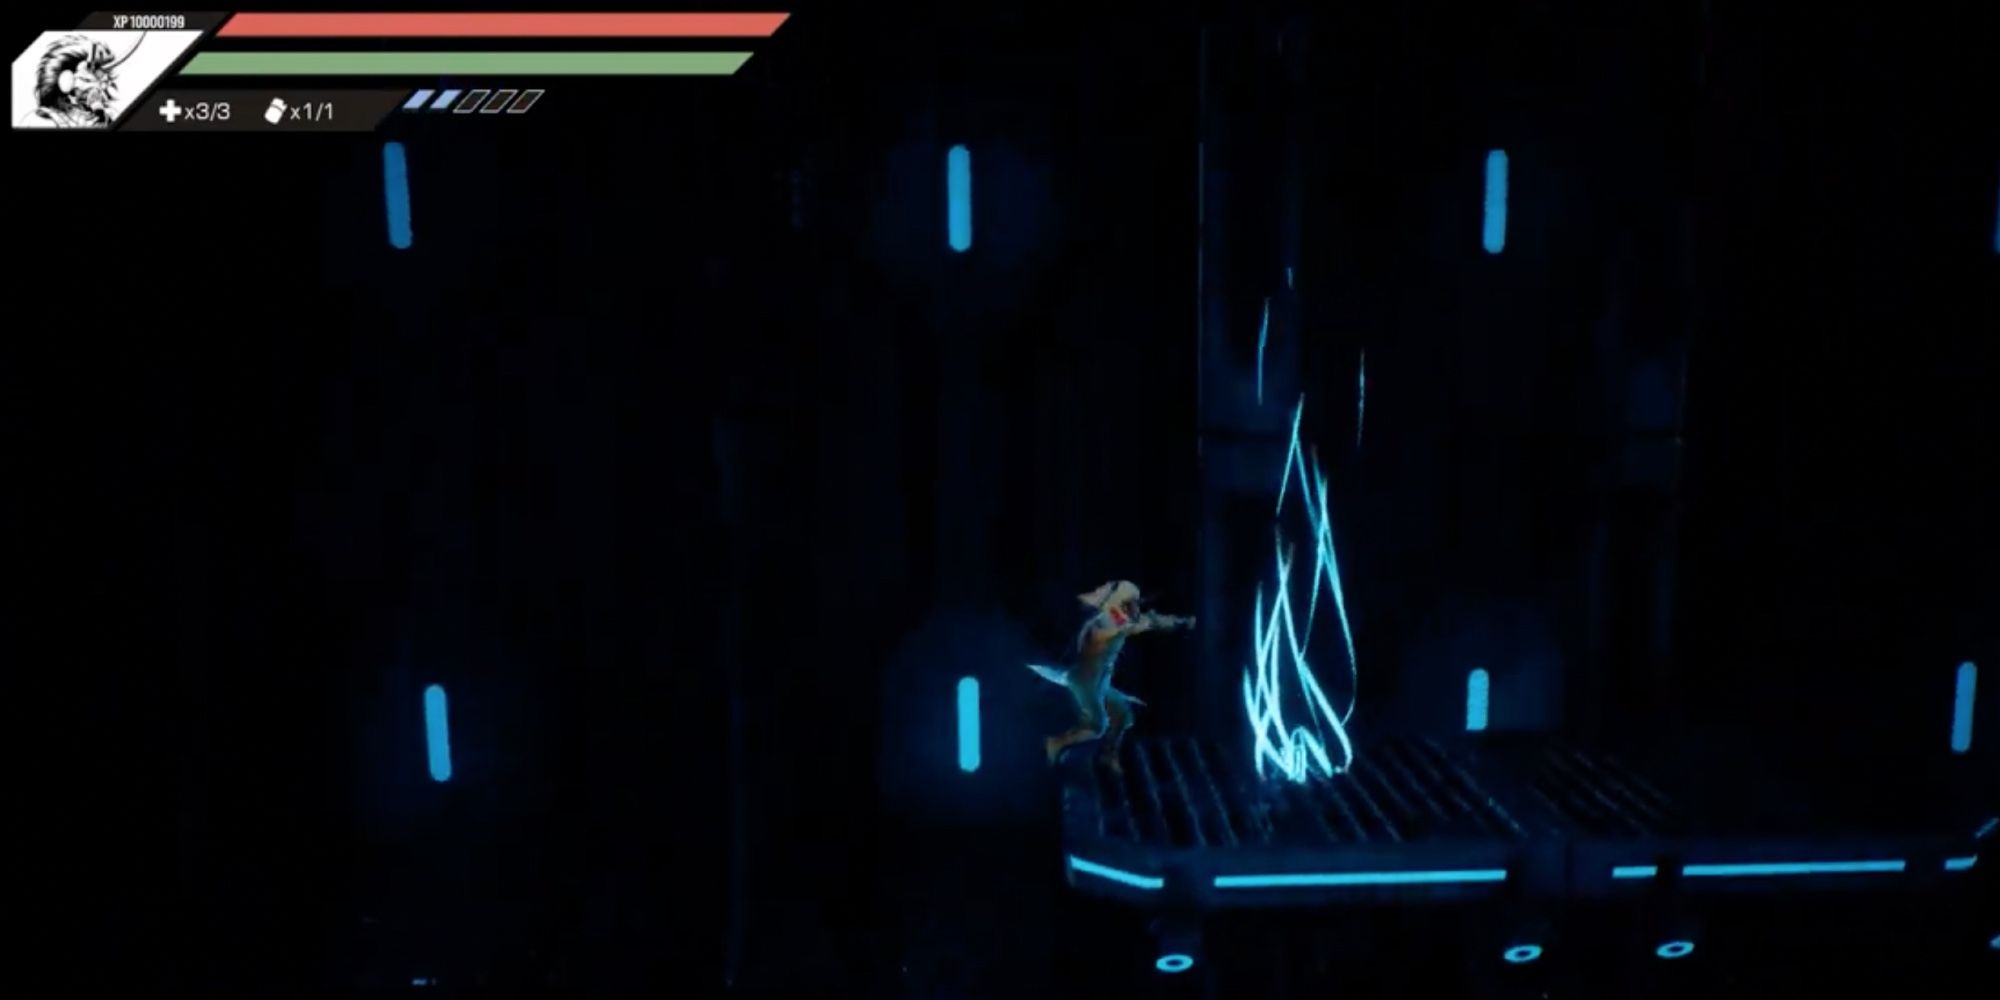 The player uses double jump to collect items in the game